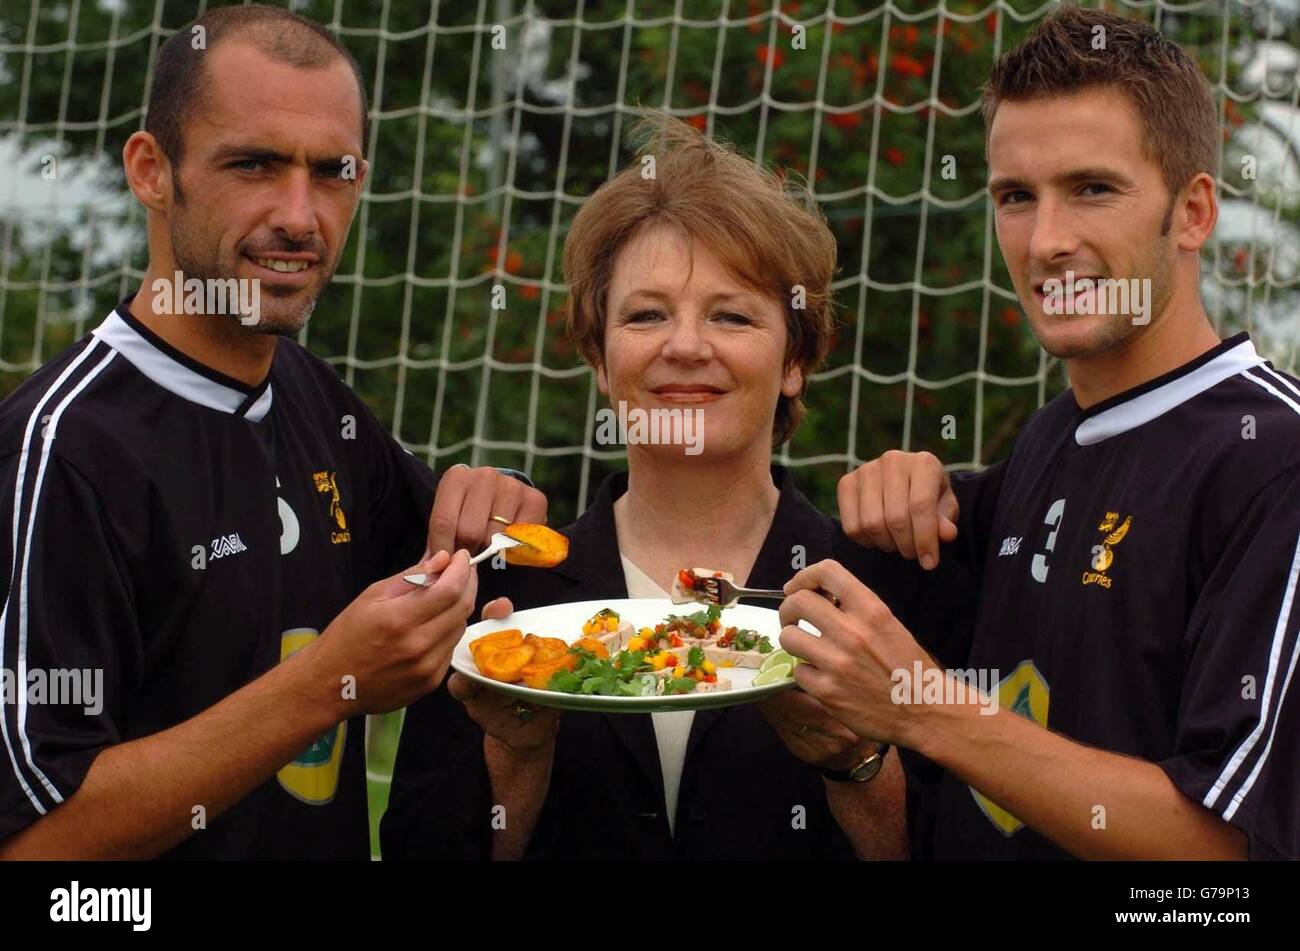 Norwich City Football Club Director Delia Smith is sandwiched between Norwich City players Adam Drury (right, Captain) and Craig Fleming (left, Club Captain) at the Norwich City training ground in Norwich. The celebrity chef and club shareholder shows off a plate of food that forms part of her Fuel Time Plan, a carbohydrate-rich, low-fat eating strategy for the team. Stock Photo